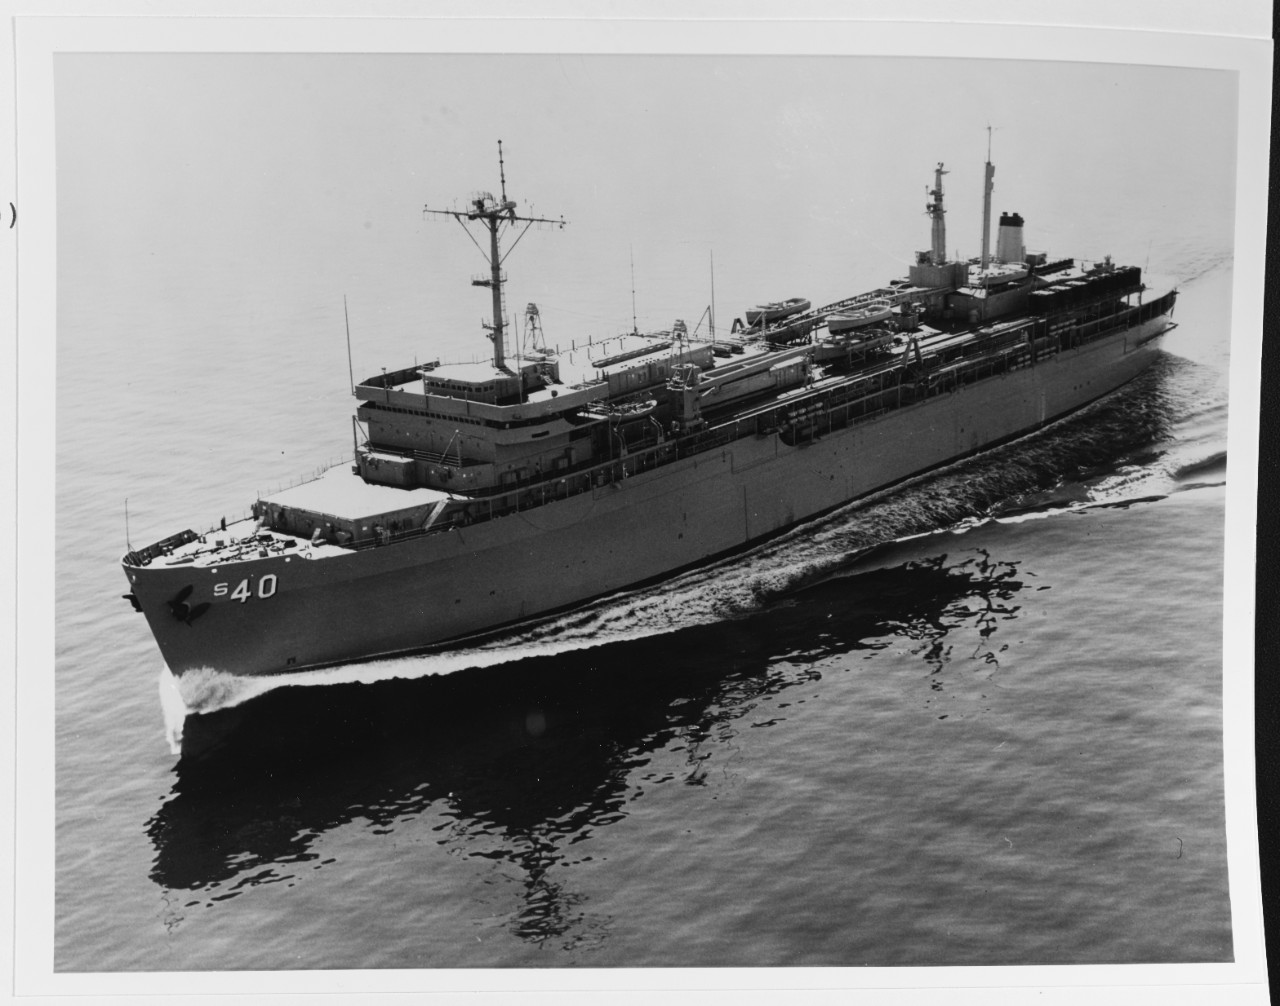 USS FRANK CABLE (AS-40)